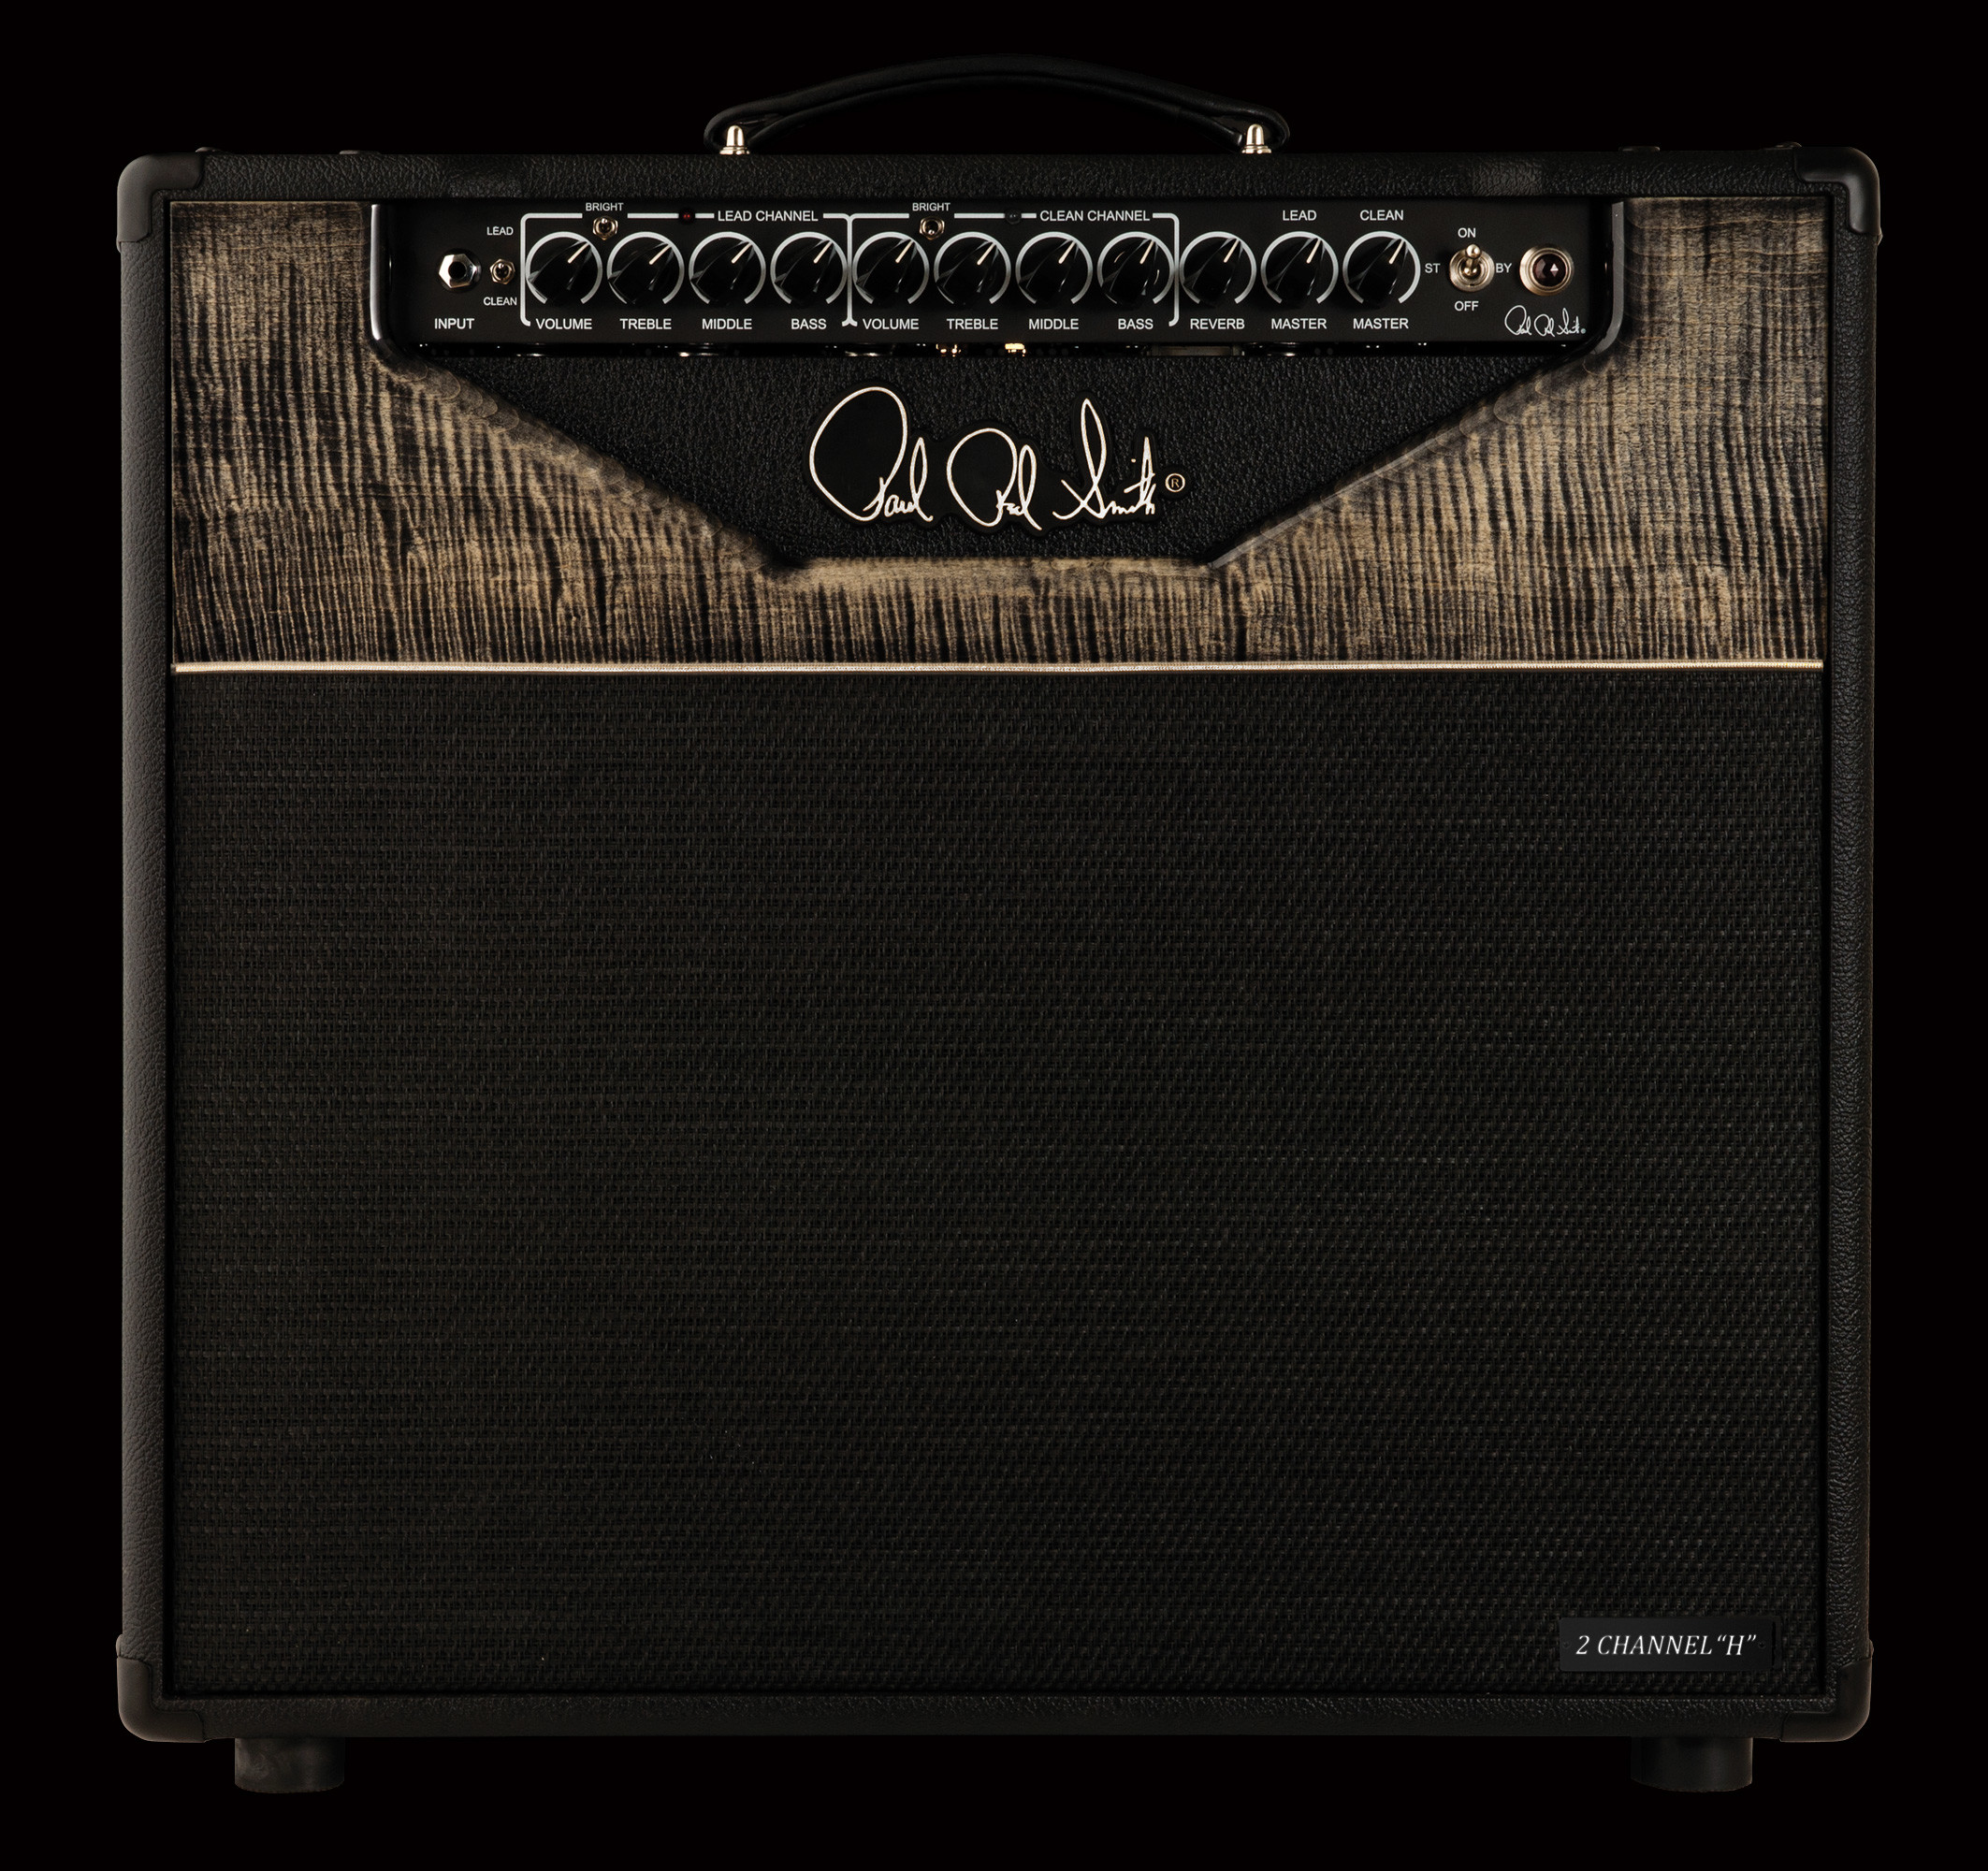 PRS Guitars core amplifier line is set to be offered with curly maple fascias as a standard feature, stained Charcoal. Introduced in 2009, the core line